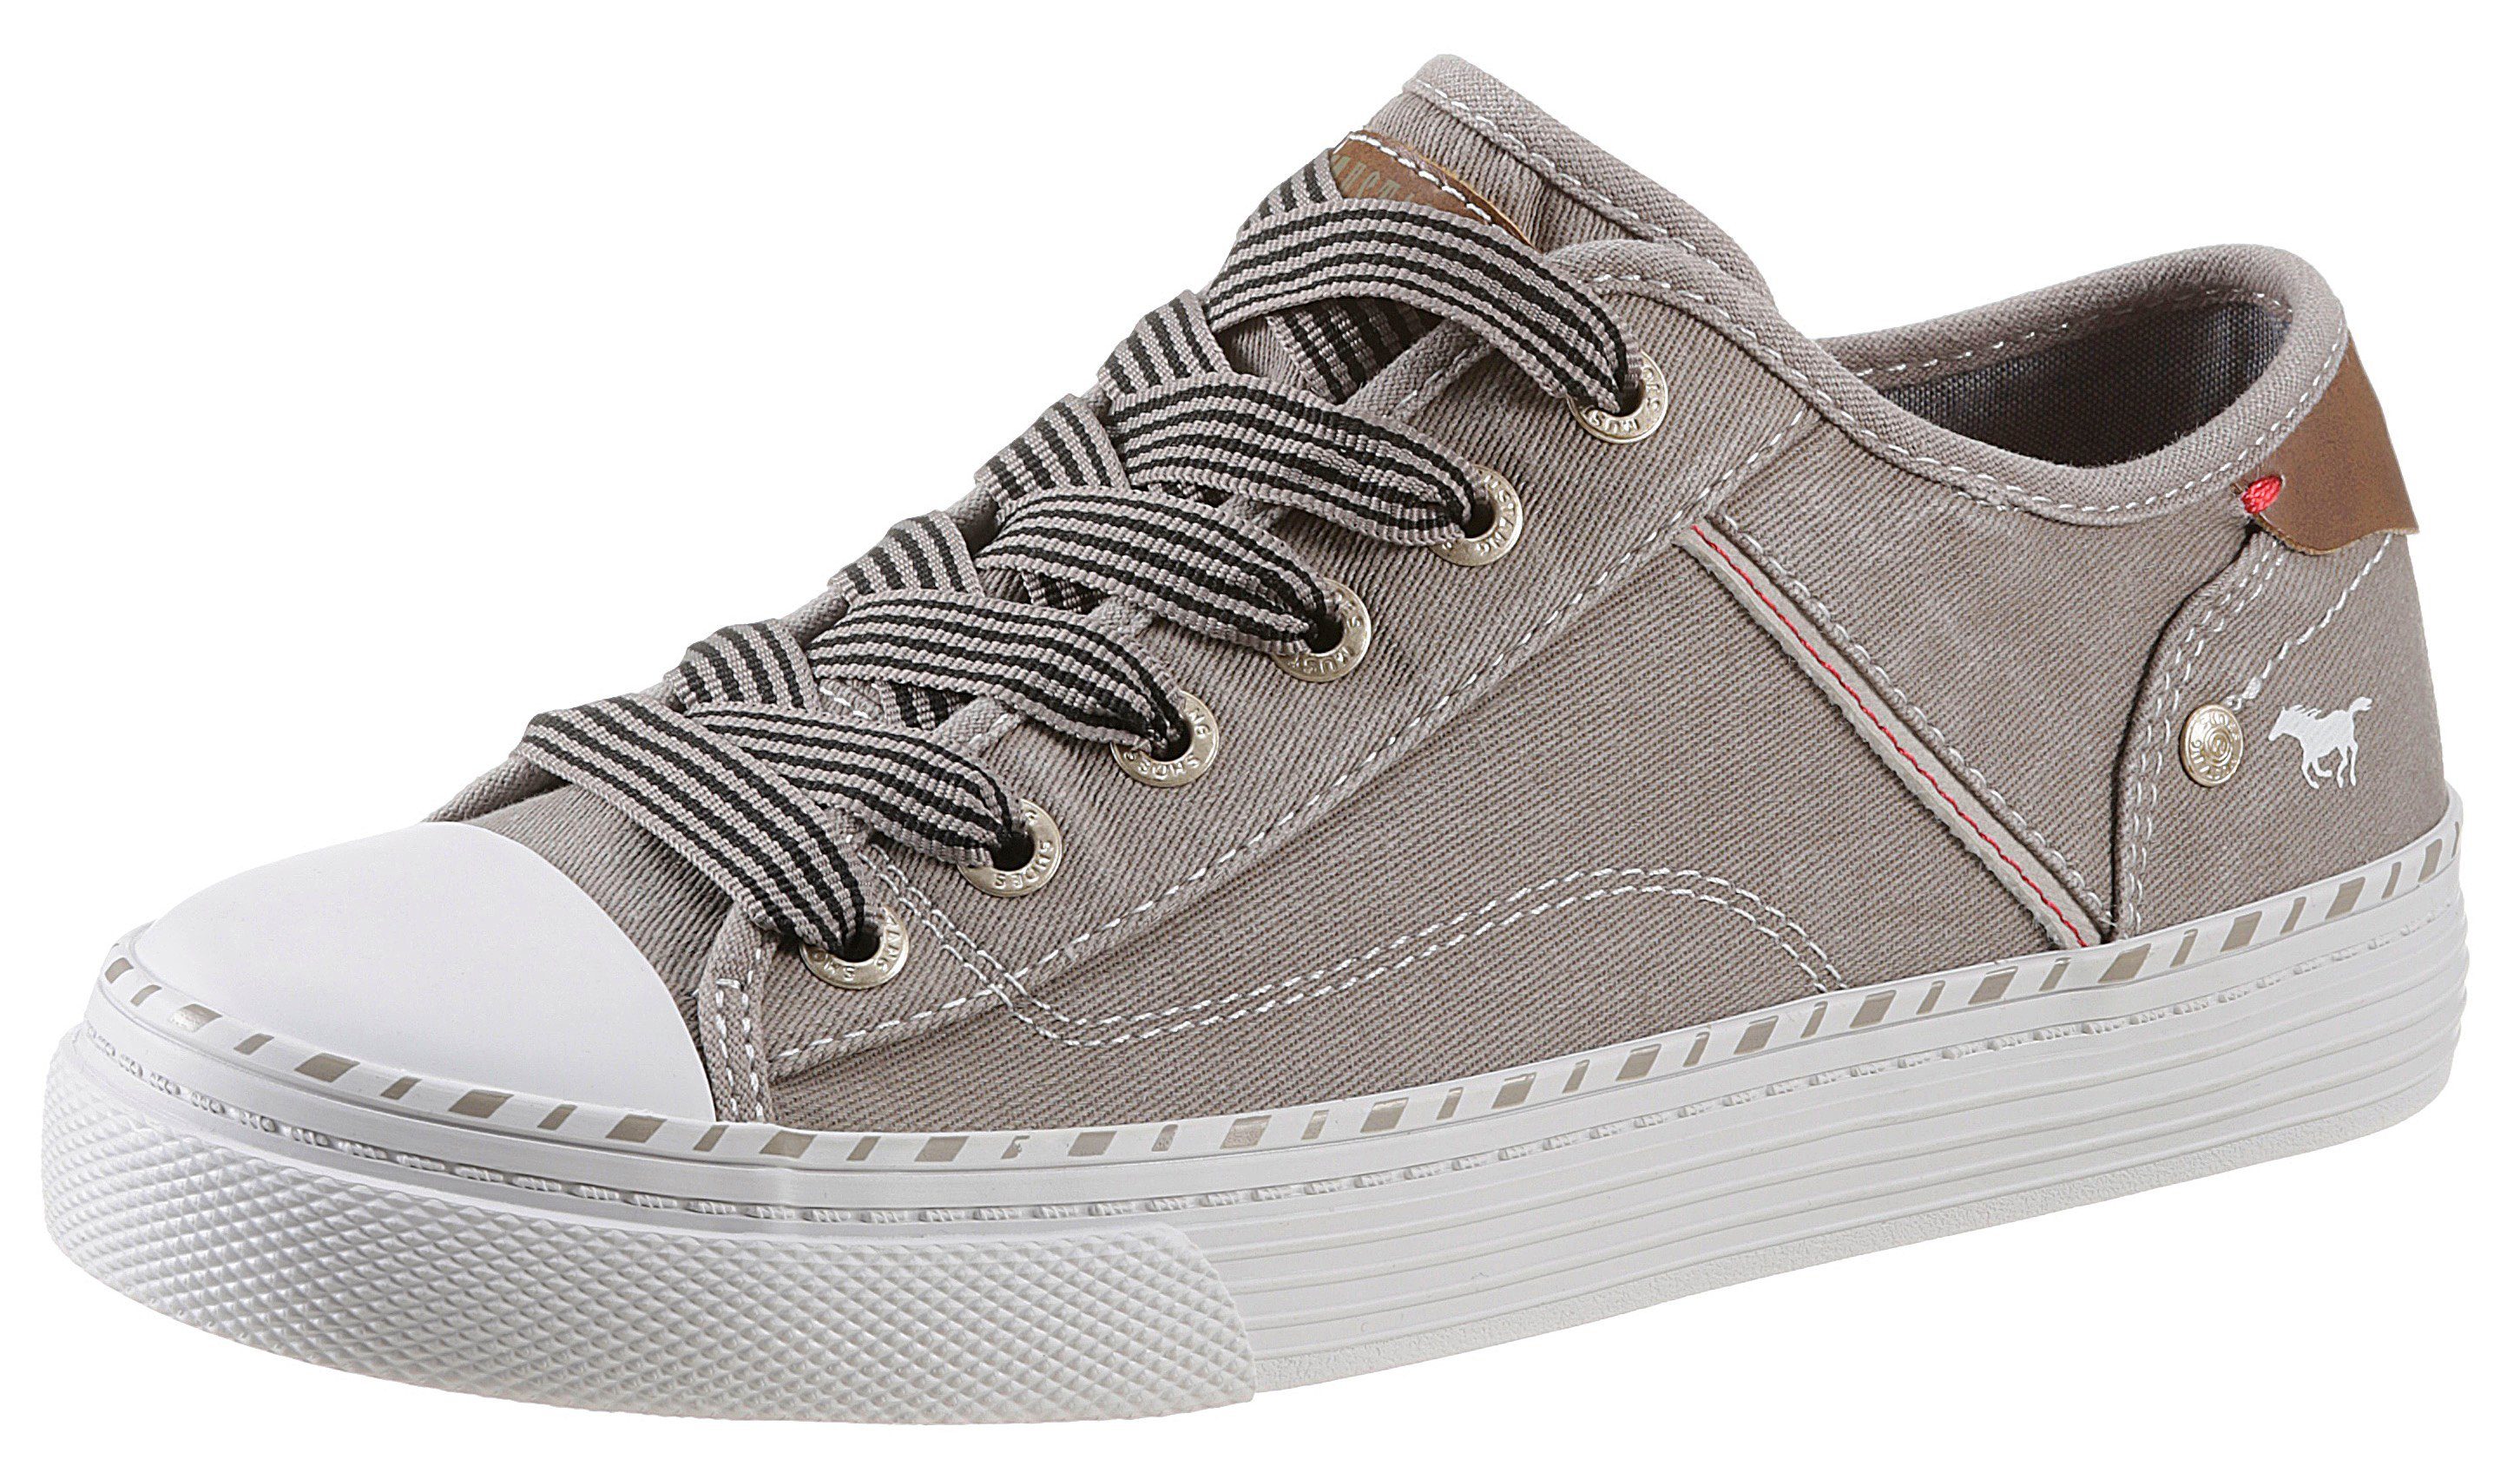 3 Sneaker Plateausohle mit Shoes Mustang cm taupe